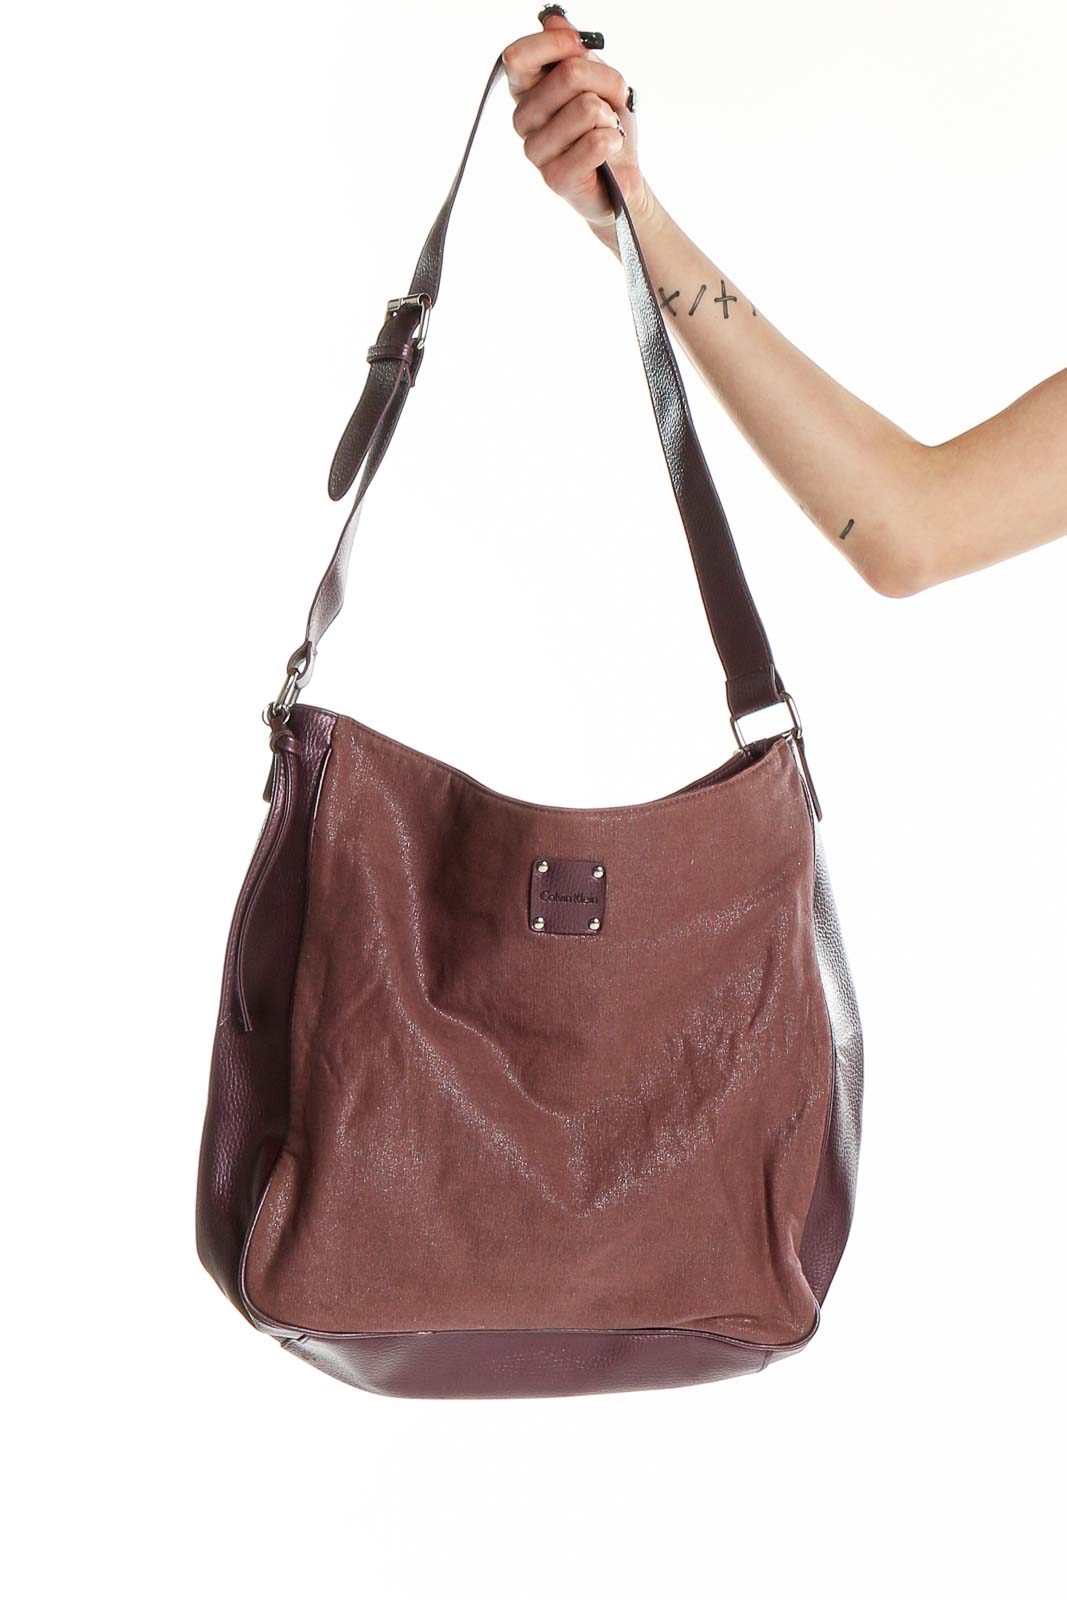 Purple Shimmery Tote Bag Front